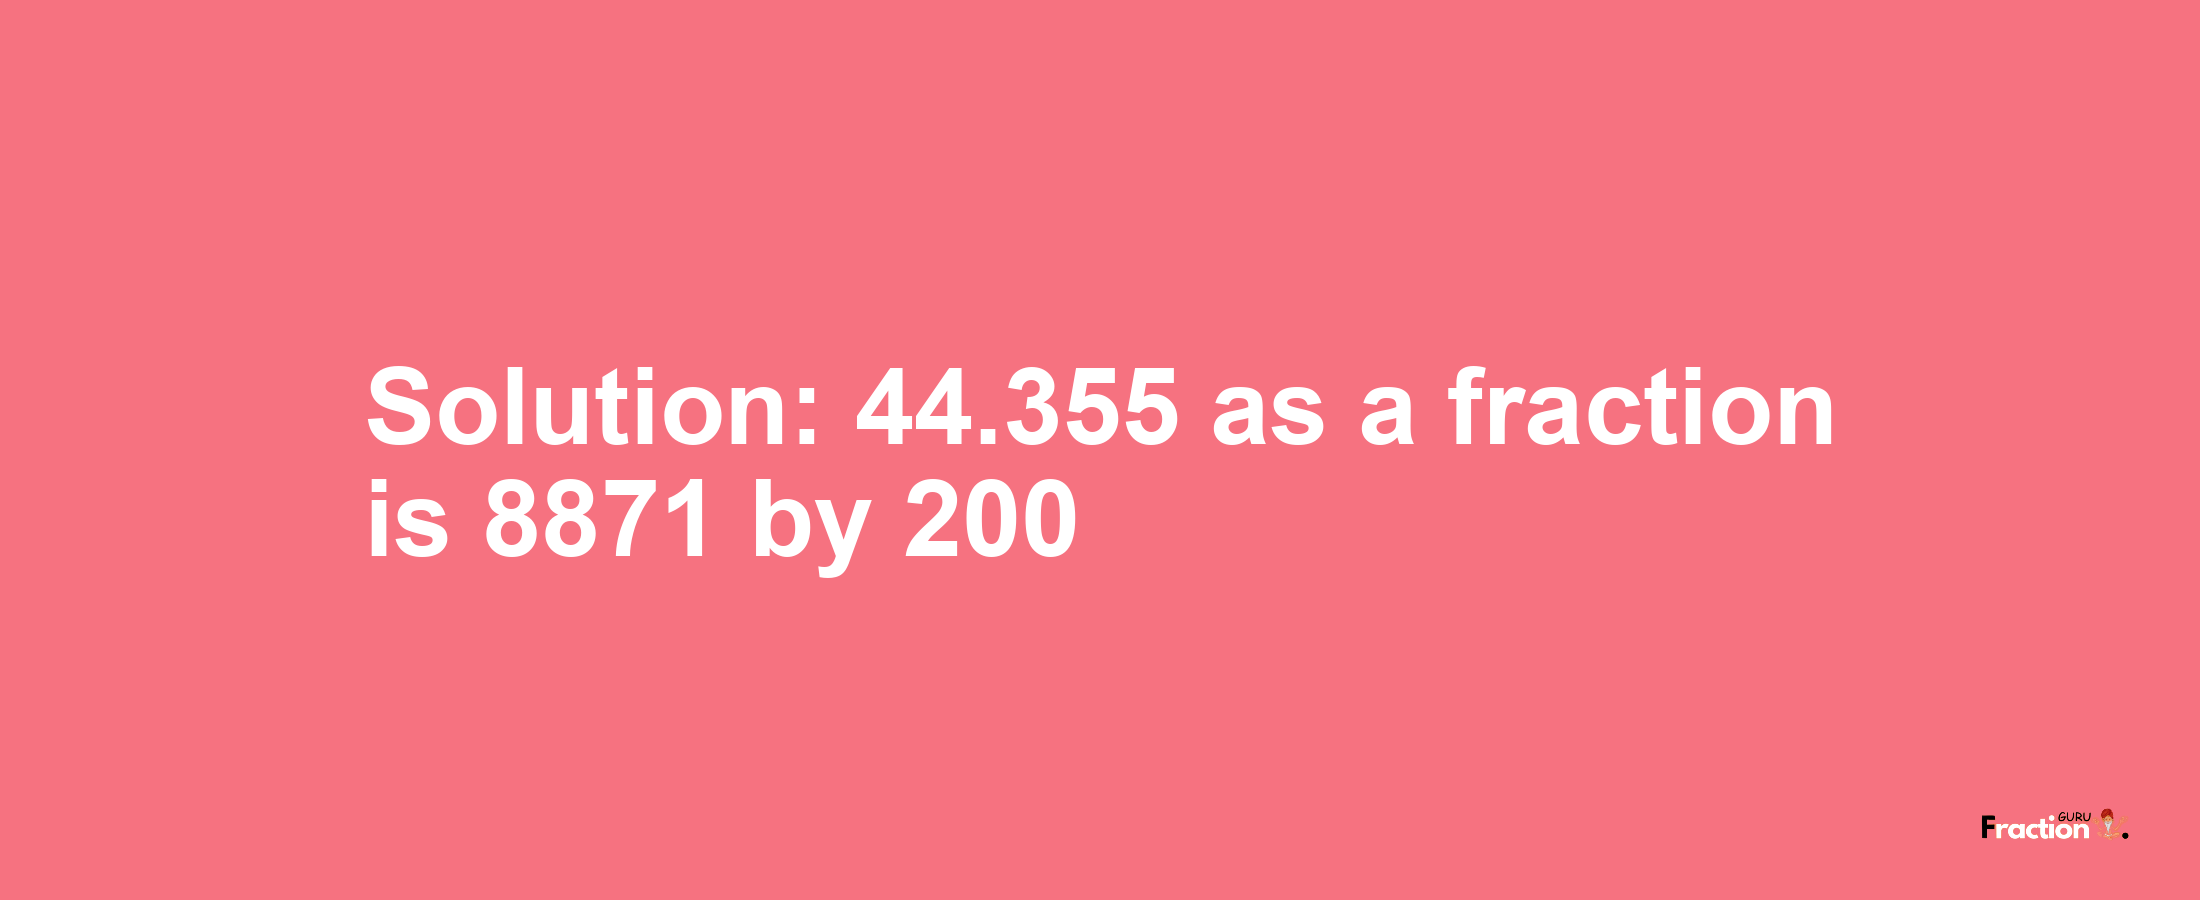 Solution:44.355 as a fraction is 8871/200